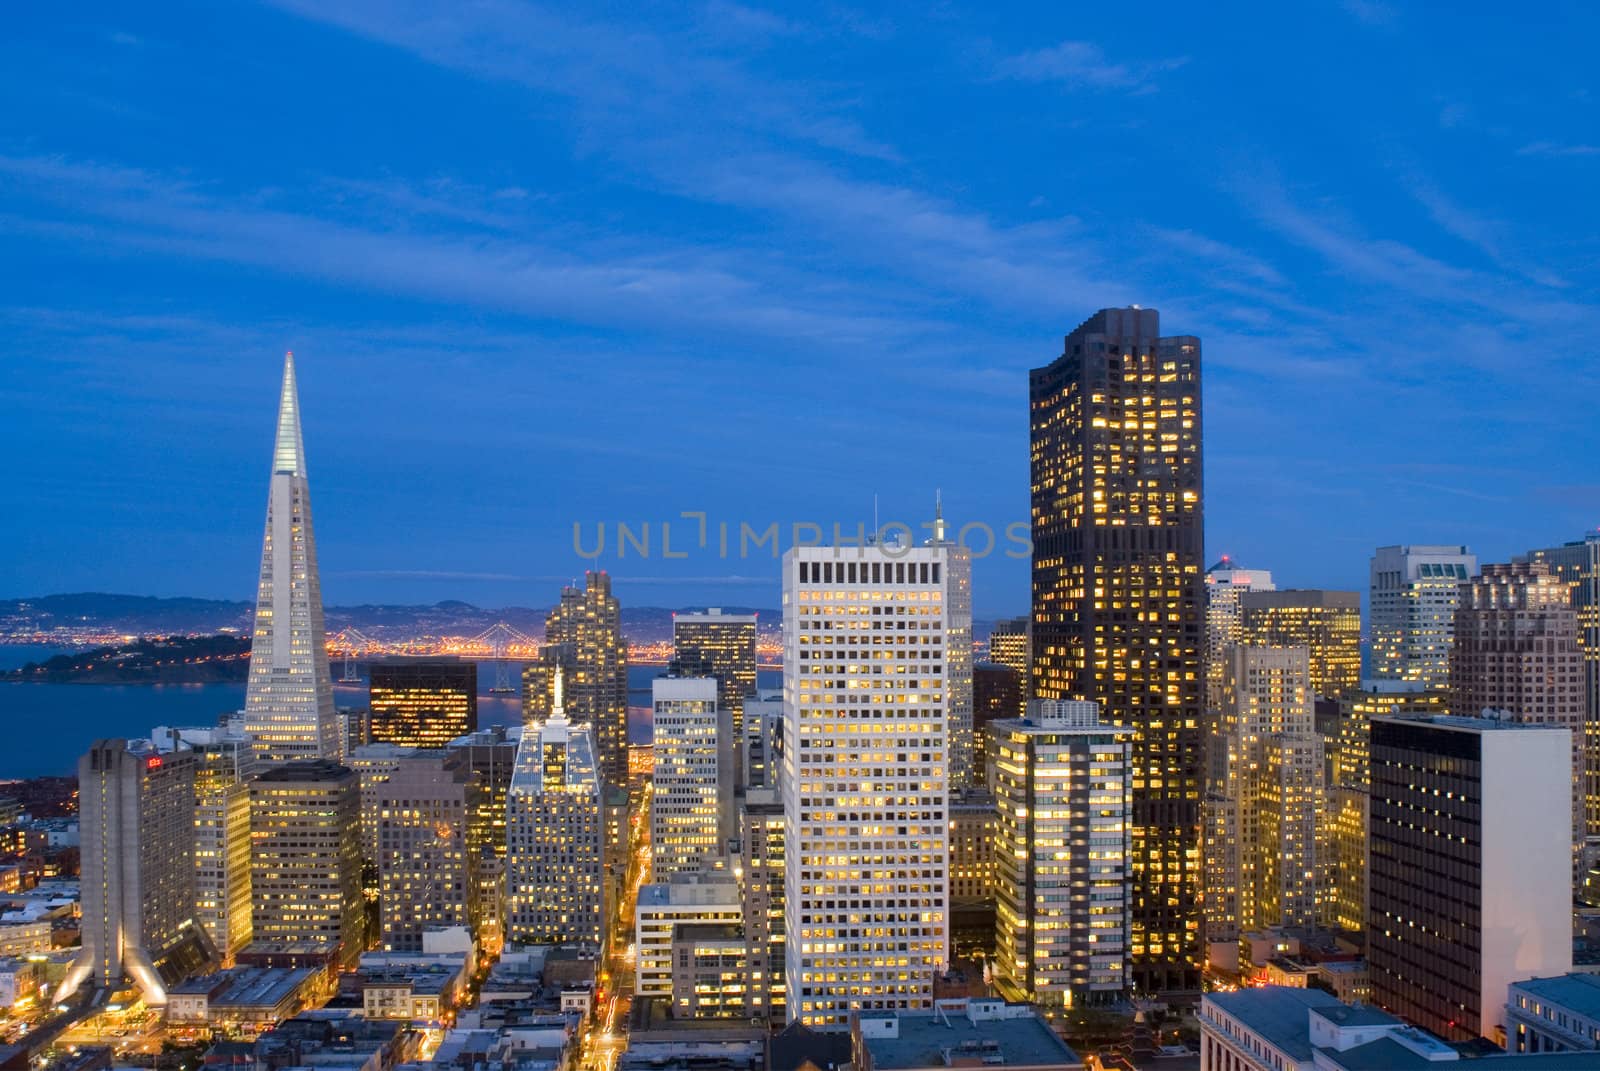 San Francisco after Sunset by stockarch